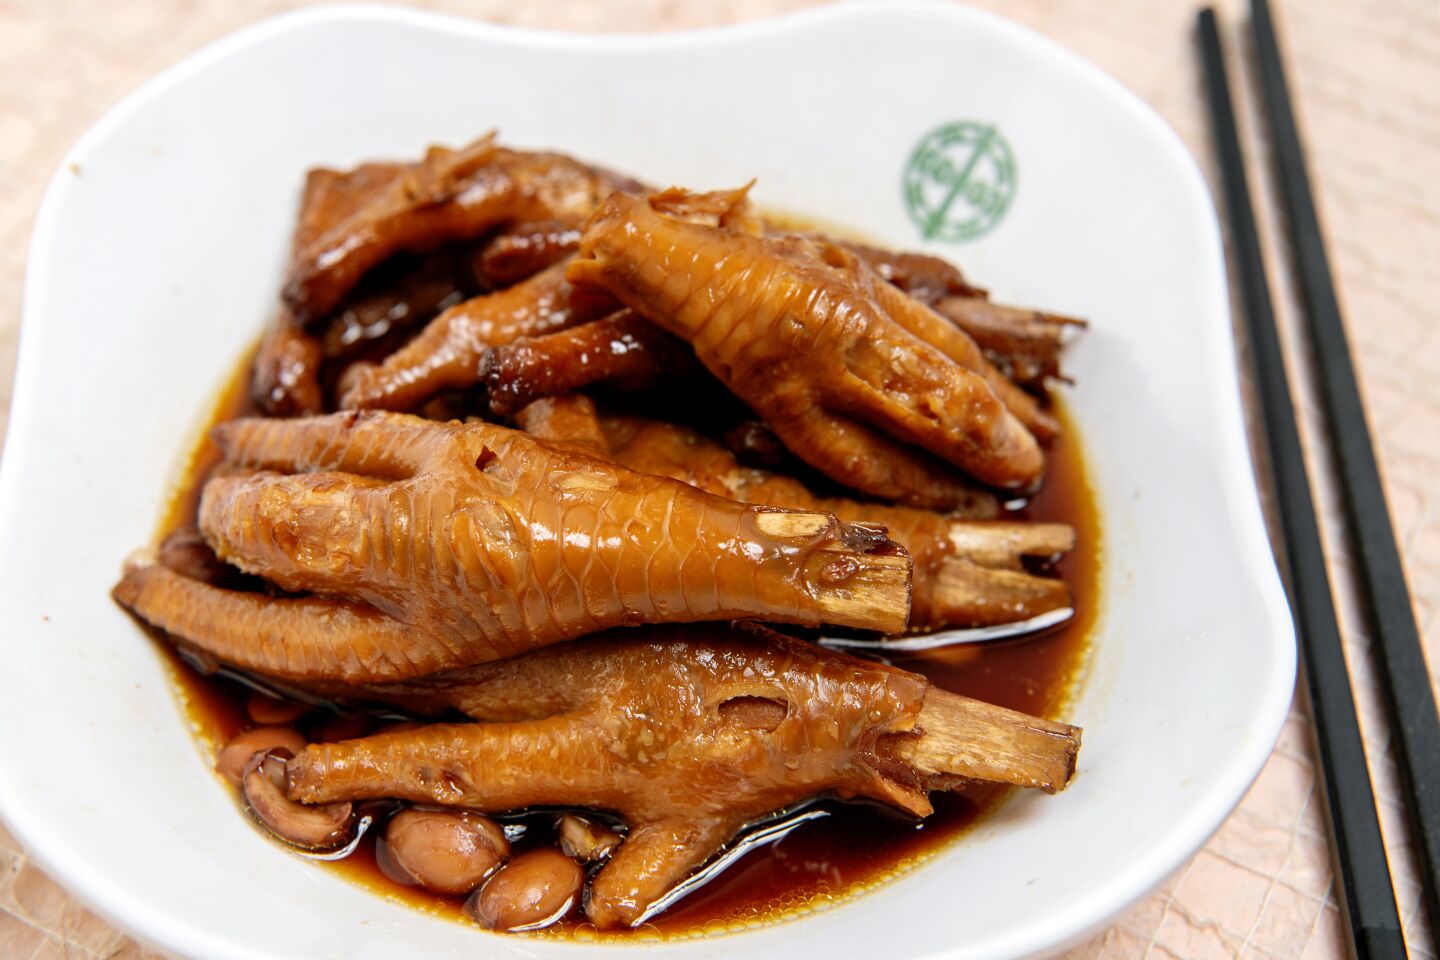 Braised chicken feet with abalone sauce and peanut from Tim Ho Wan in Irvine